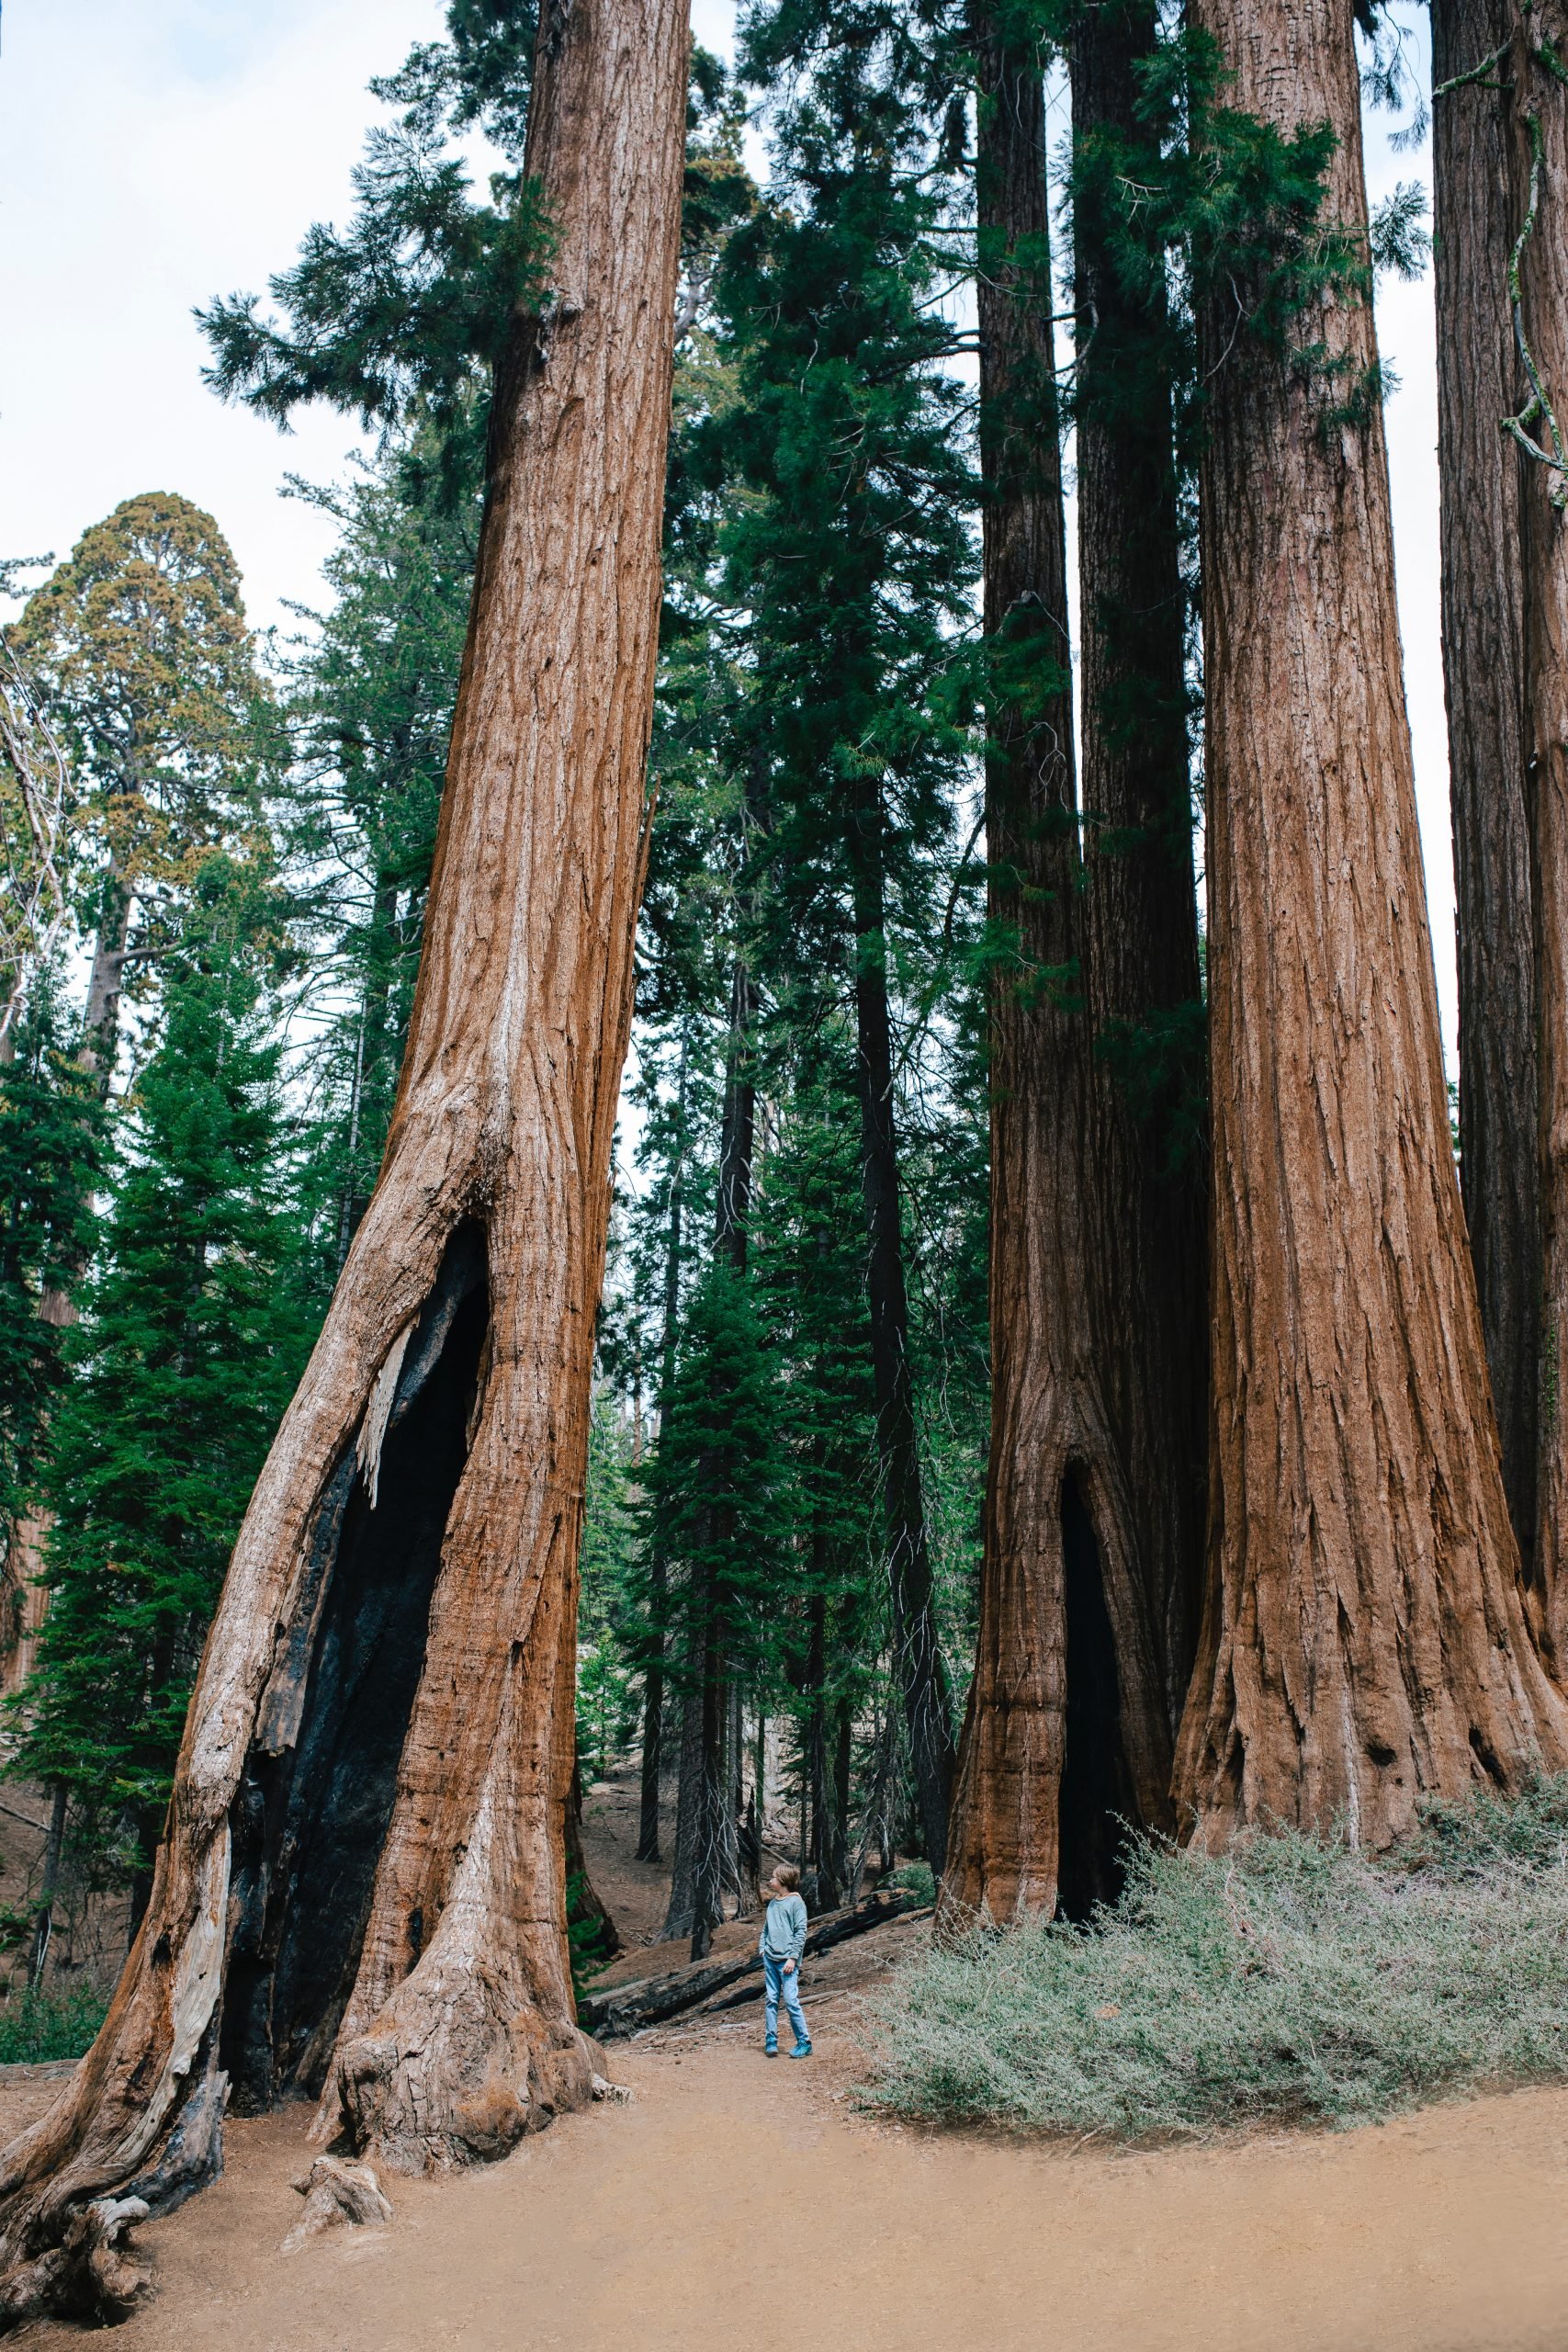 Home to the largest remaining grove of sequoia trees in the world - Kings Canyon National Park